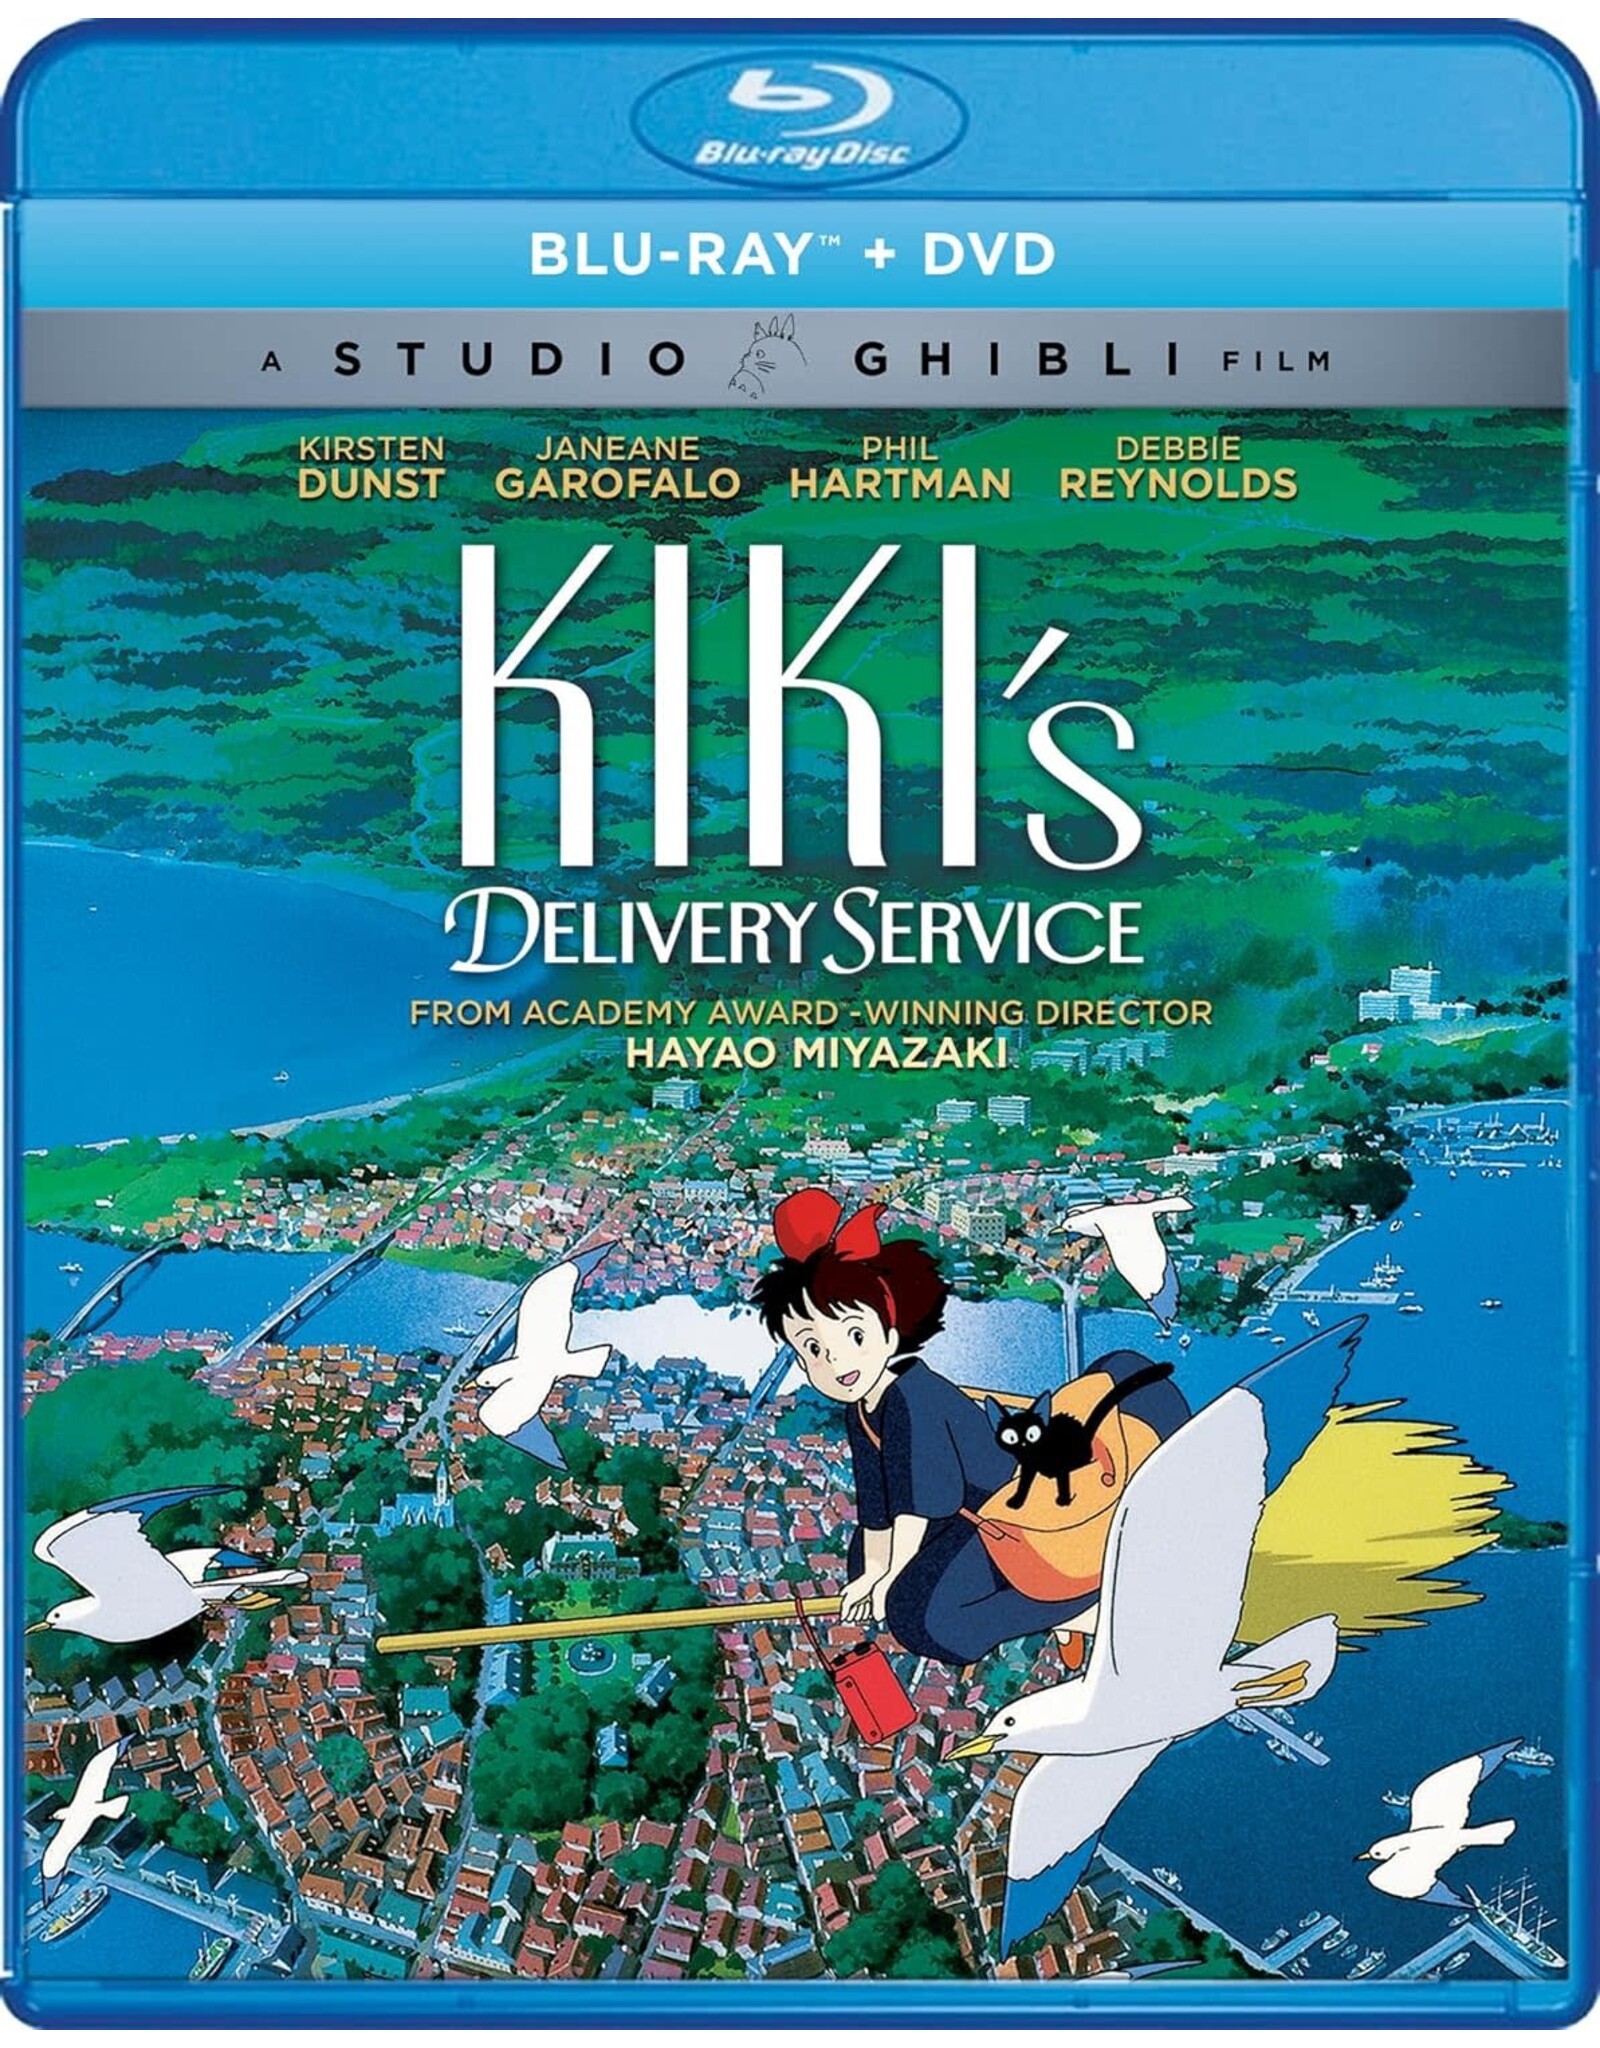 Anime & Animation Kiki's Delivery Service (Used)